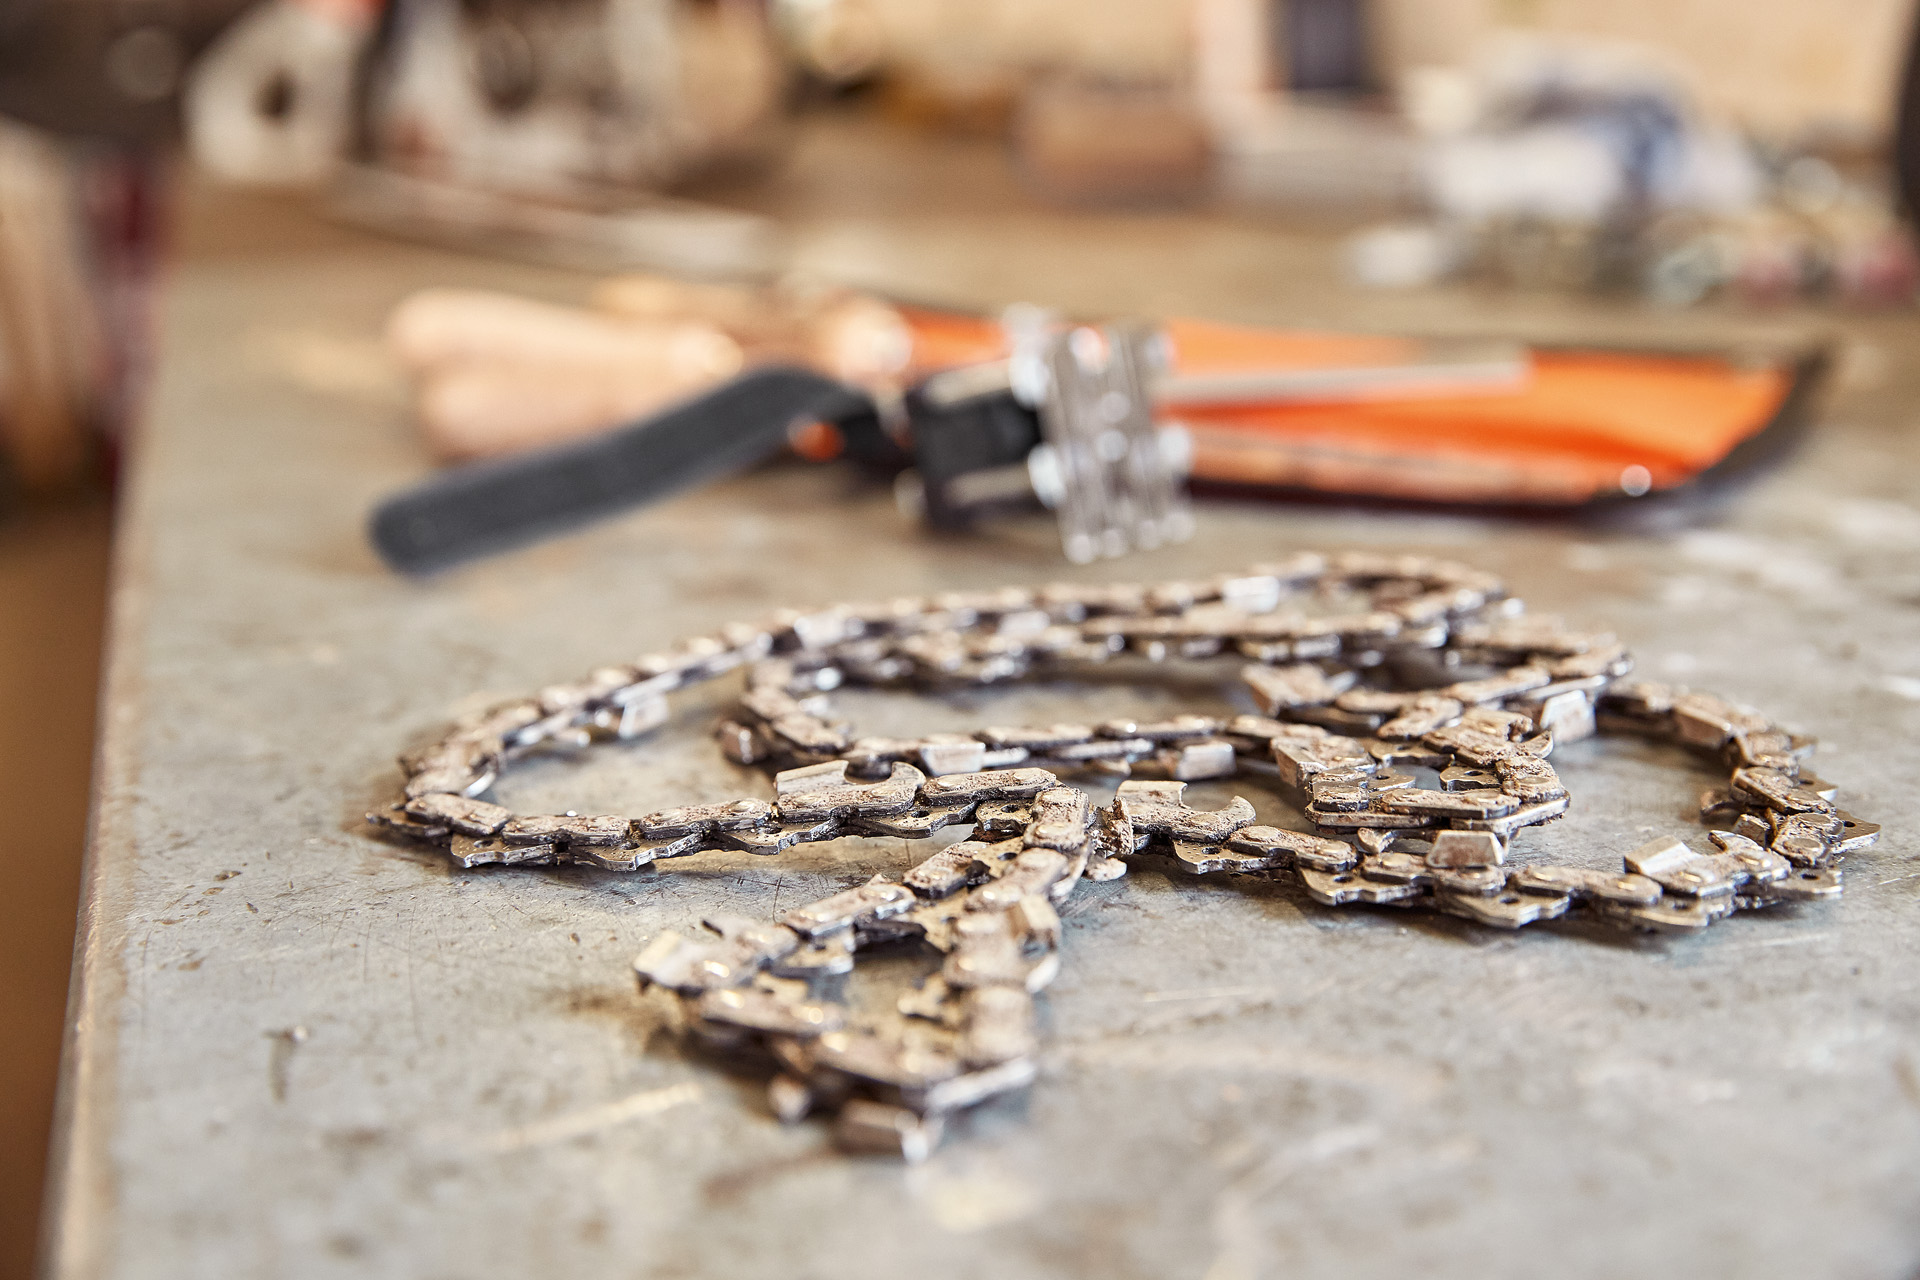 Close-up of chainsaw cutting attachment and chain on a workbench Image source: SK-OILOMATIC_KETTE-IM-001